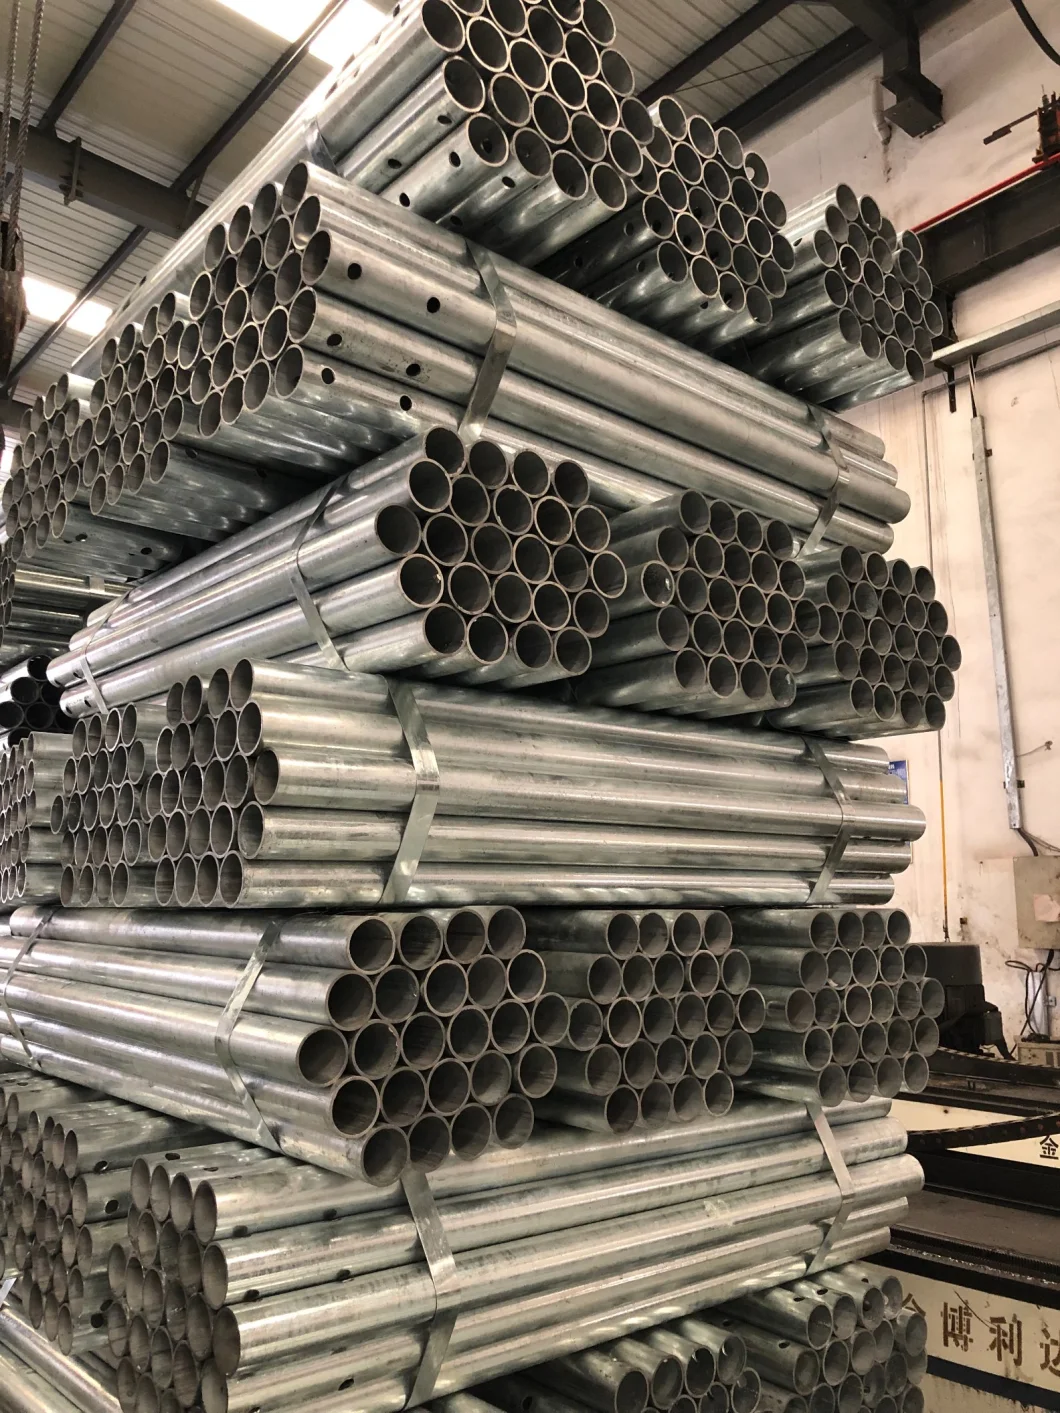 Factory Directly Mild Steel ASTM A53 ASTM A500 Sch10 Sch40 S235jrh S355joh ERW Hot Dipped Galvanized Steel Pipes for Greenhouse / Fencing / Water Tubes